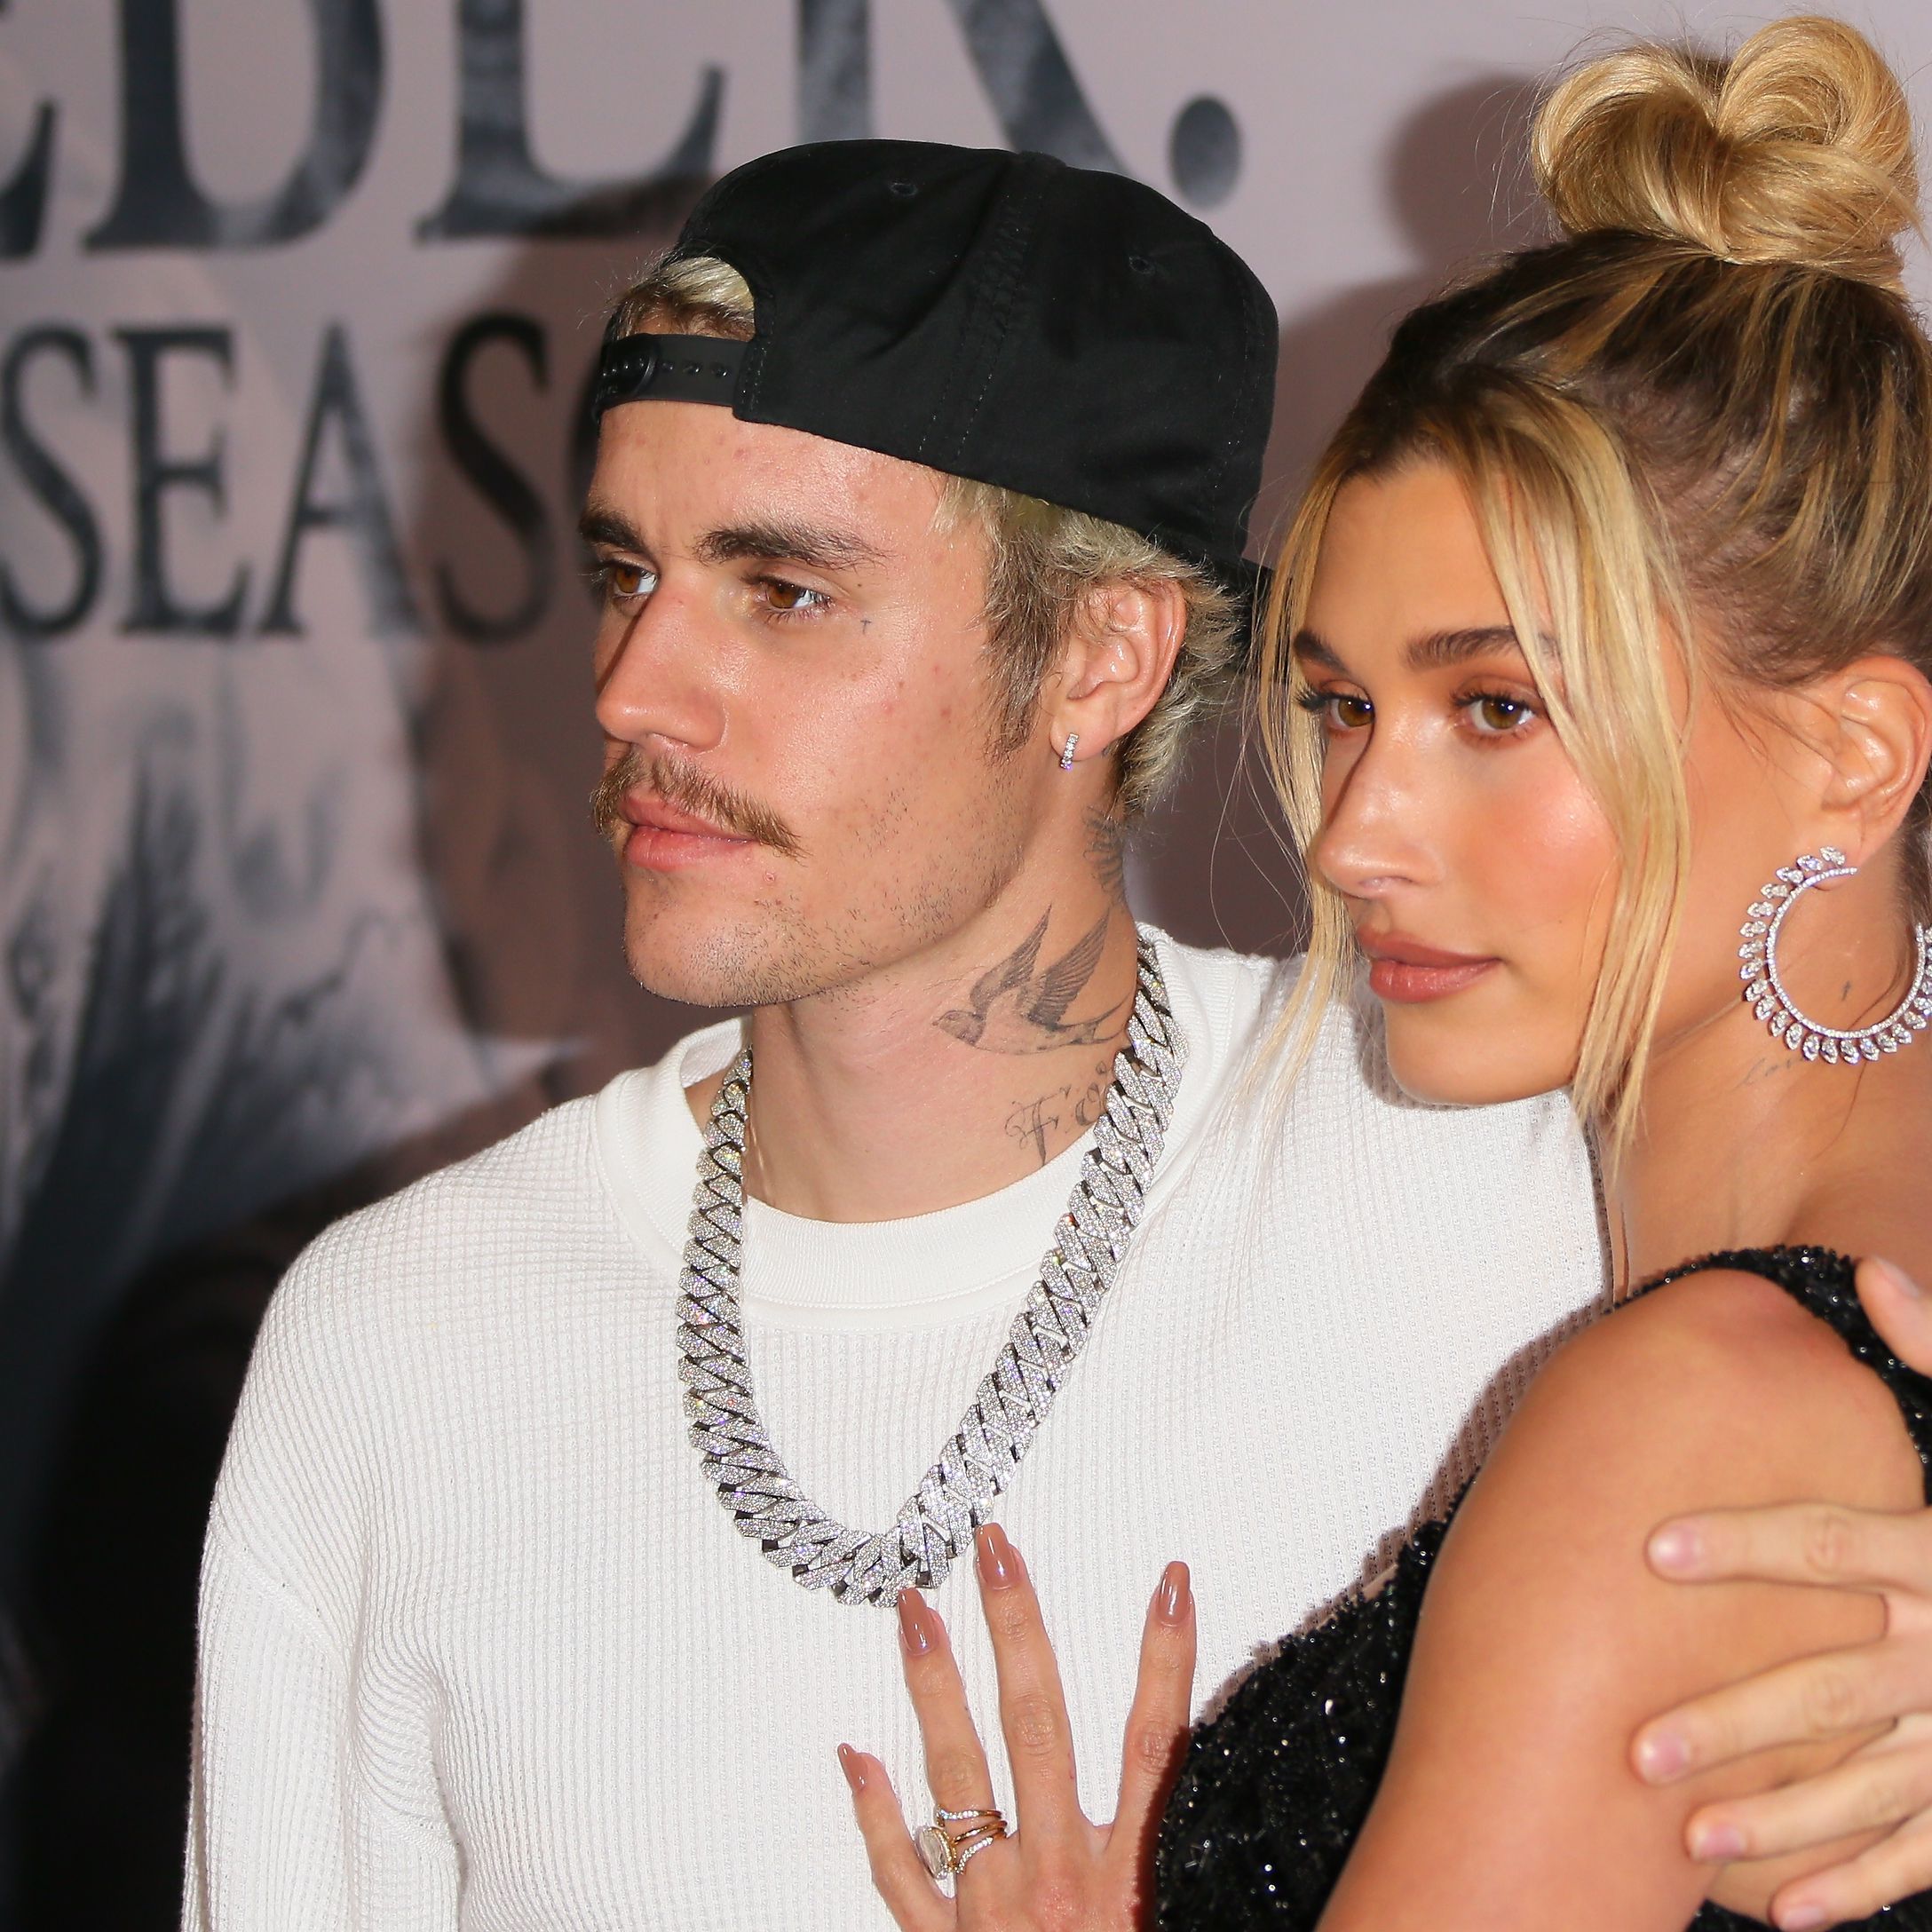 Justin Bieber gets a tattoo on his FACE in tribute to wife Hailey Baldwin   Mirror Online